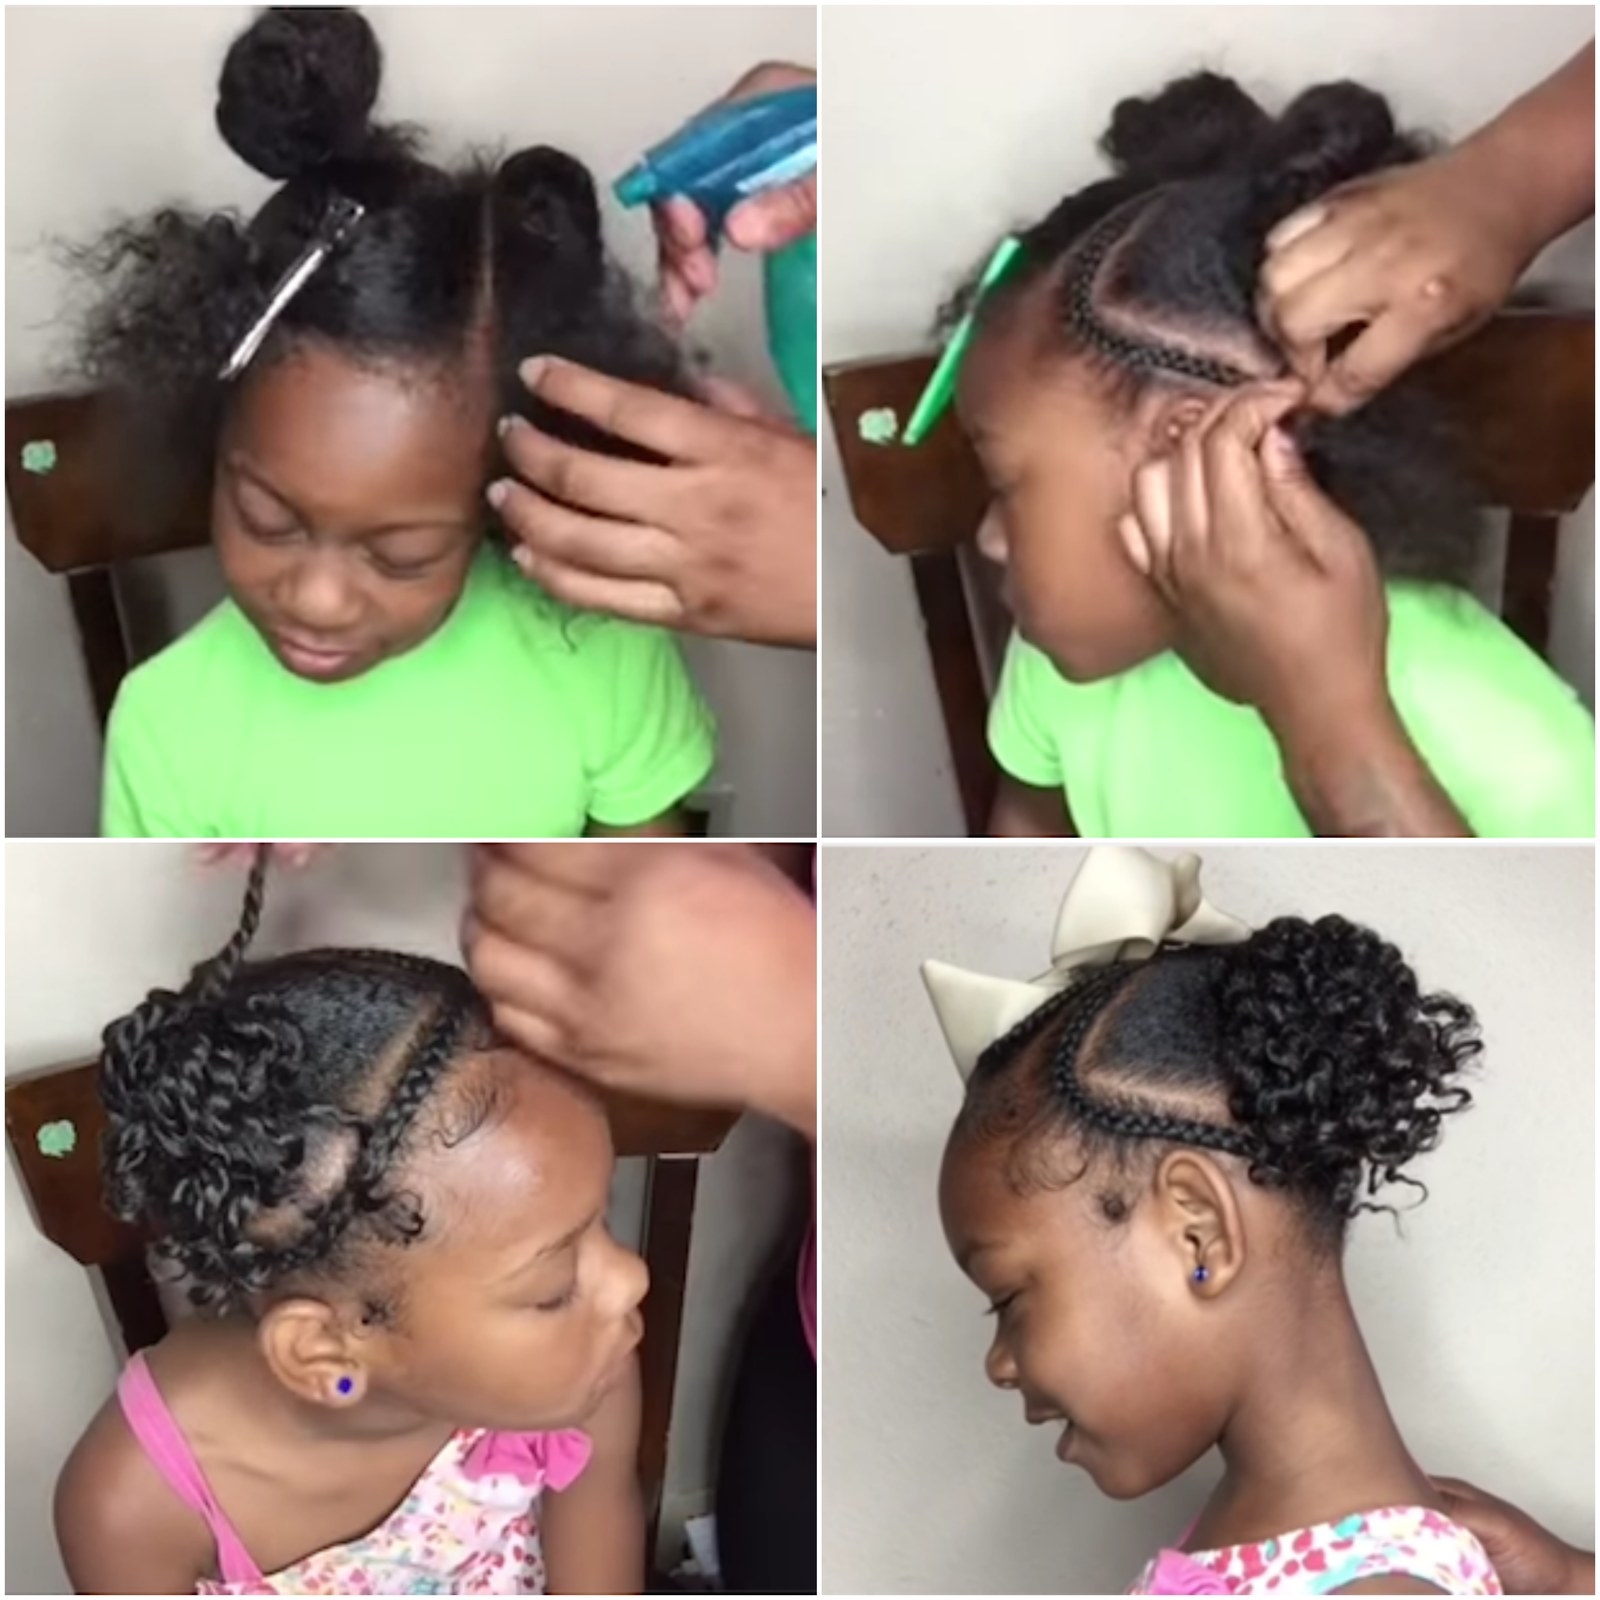 25 girl hair styles for toddlers and tweens - A girl and a glue gun